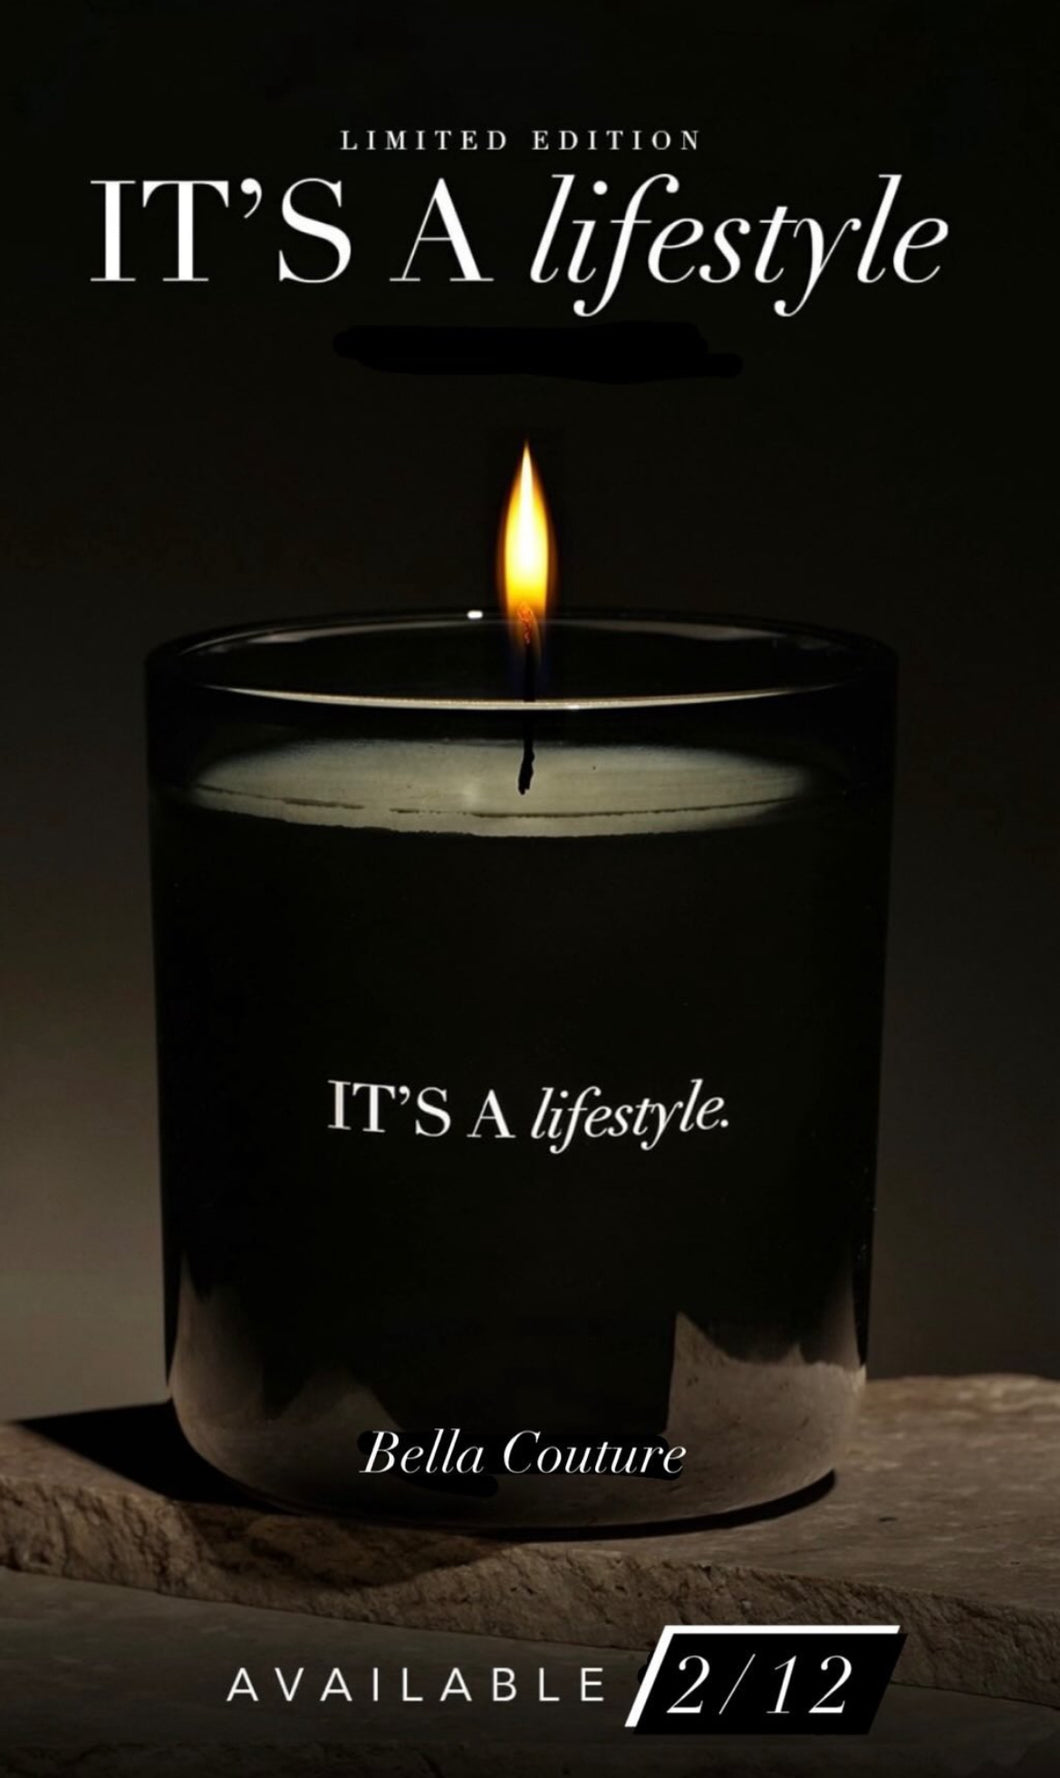 Limited Edition “It’s A Lifestyle “ candles